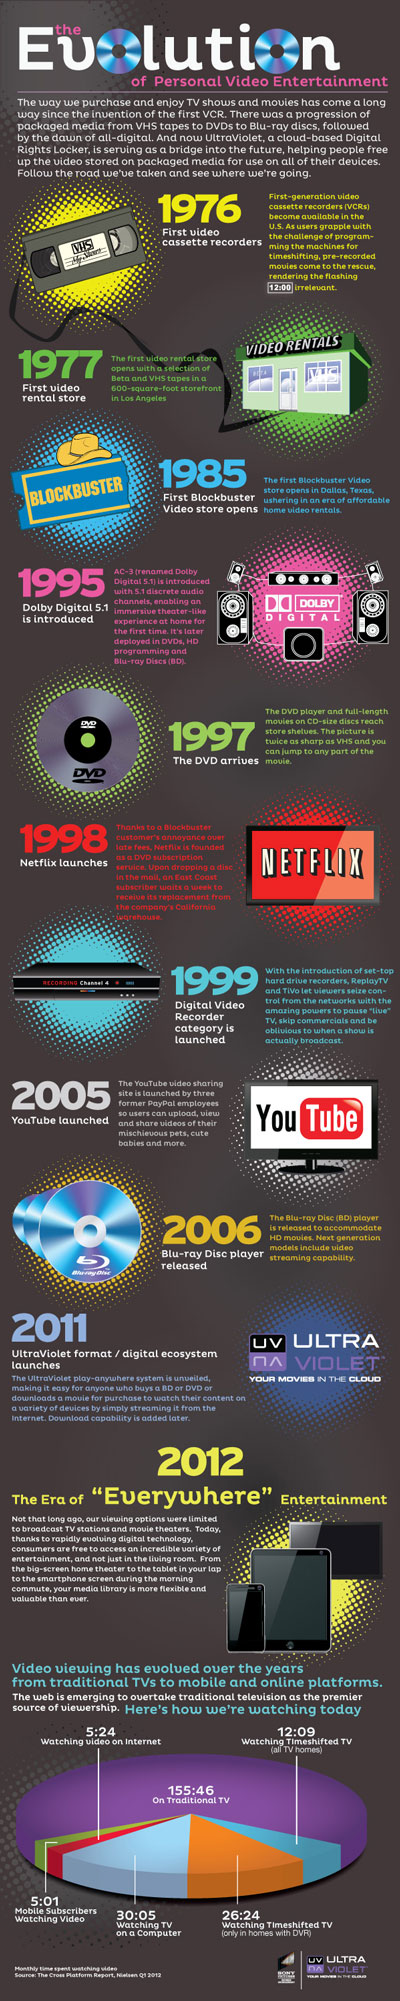 The Evolution of Personal Video Entertainment